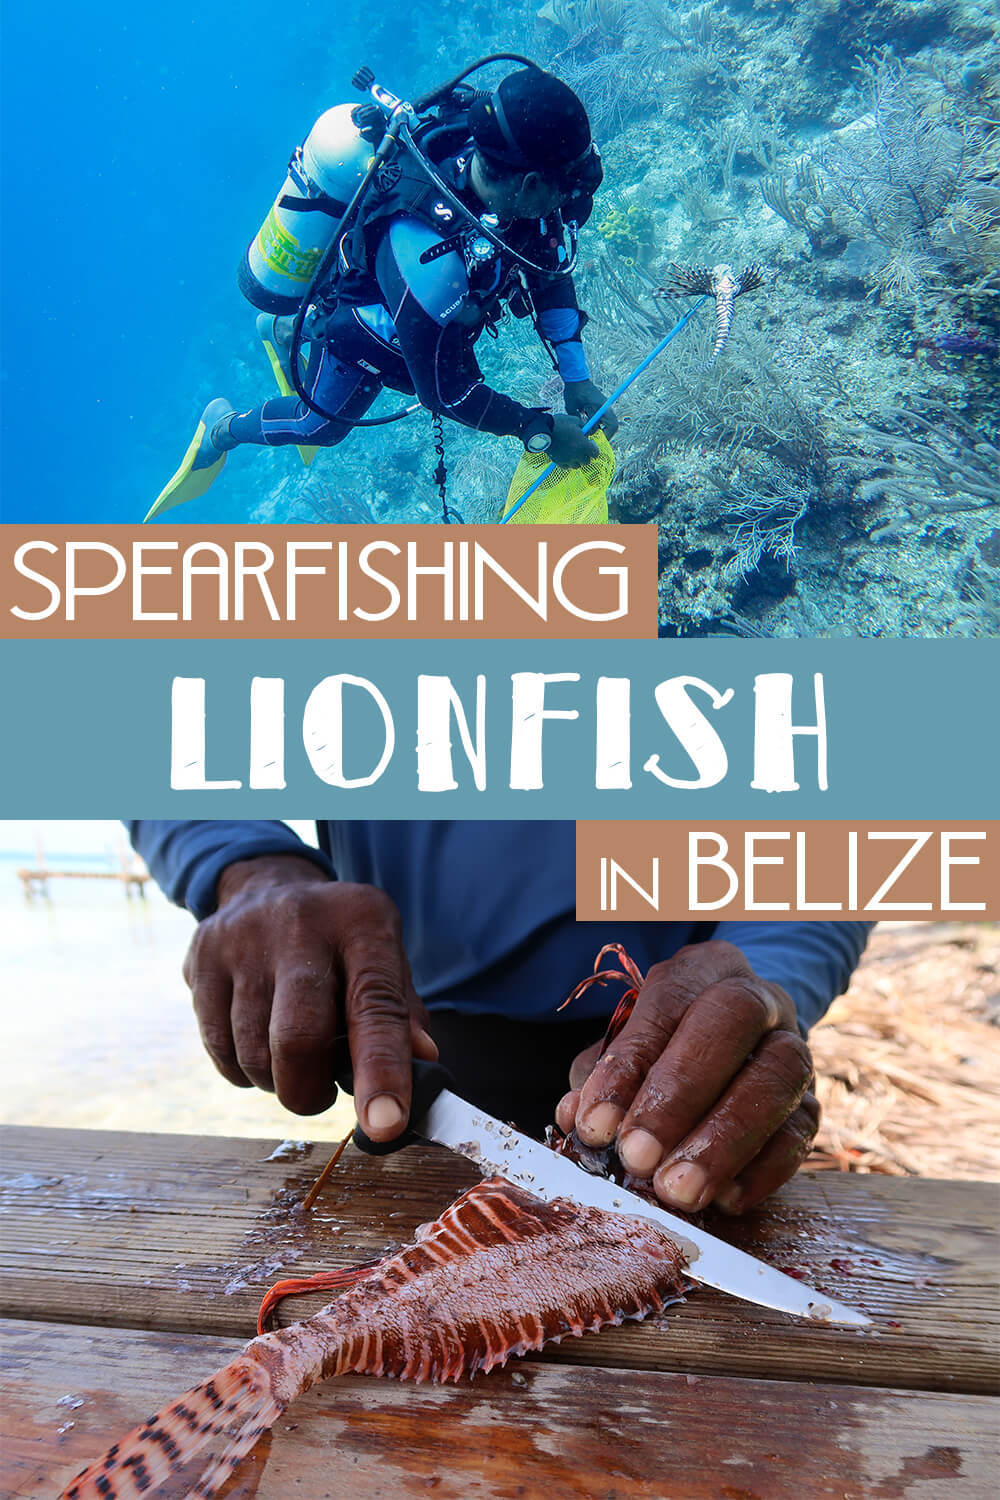 Spearfishing Lionfish in Belize